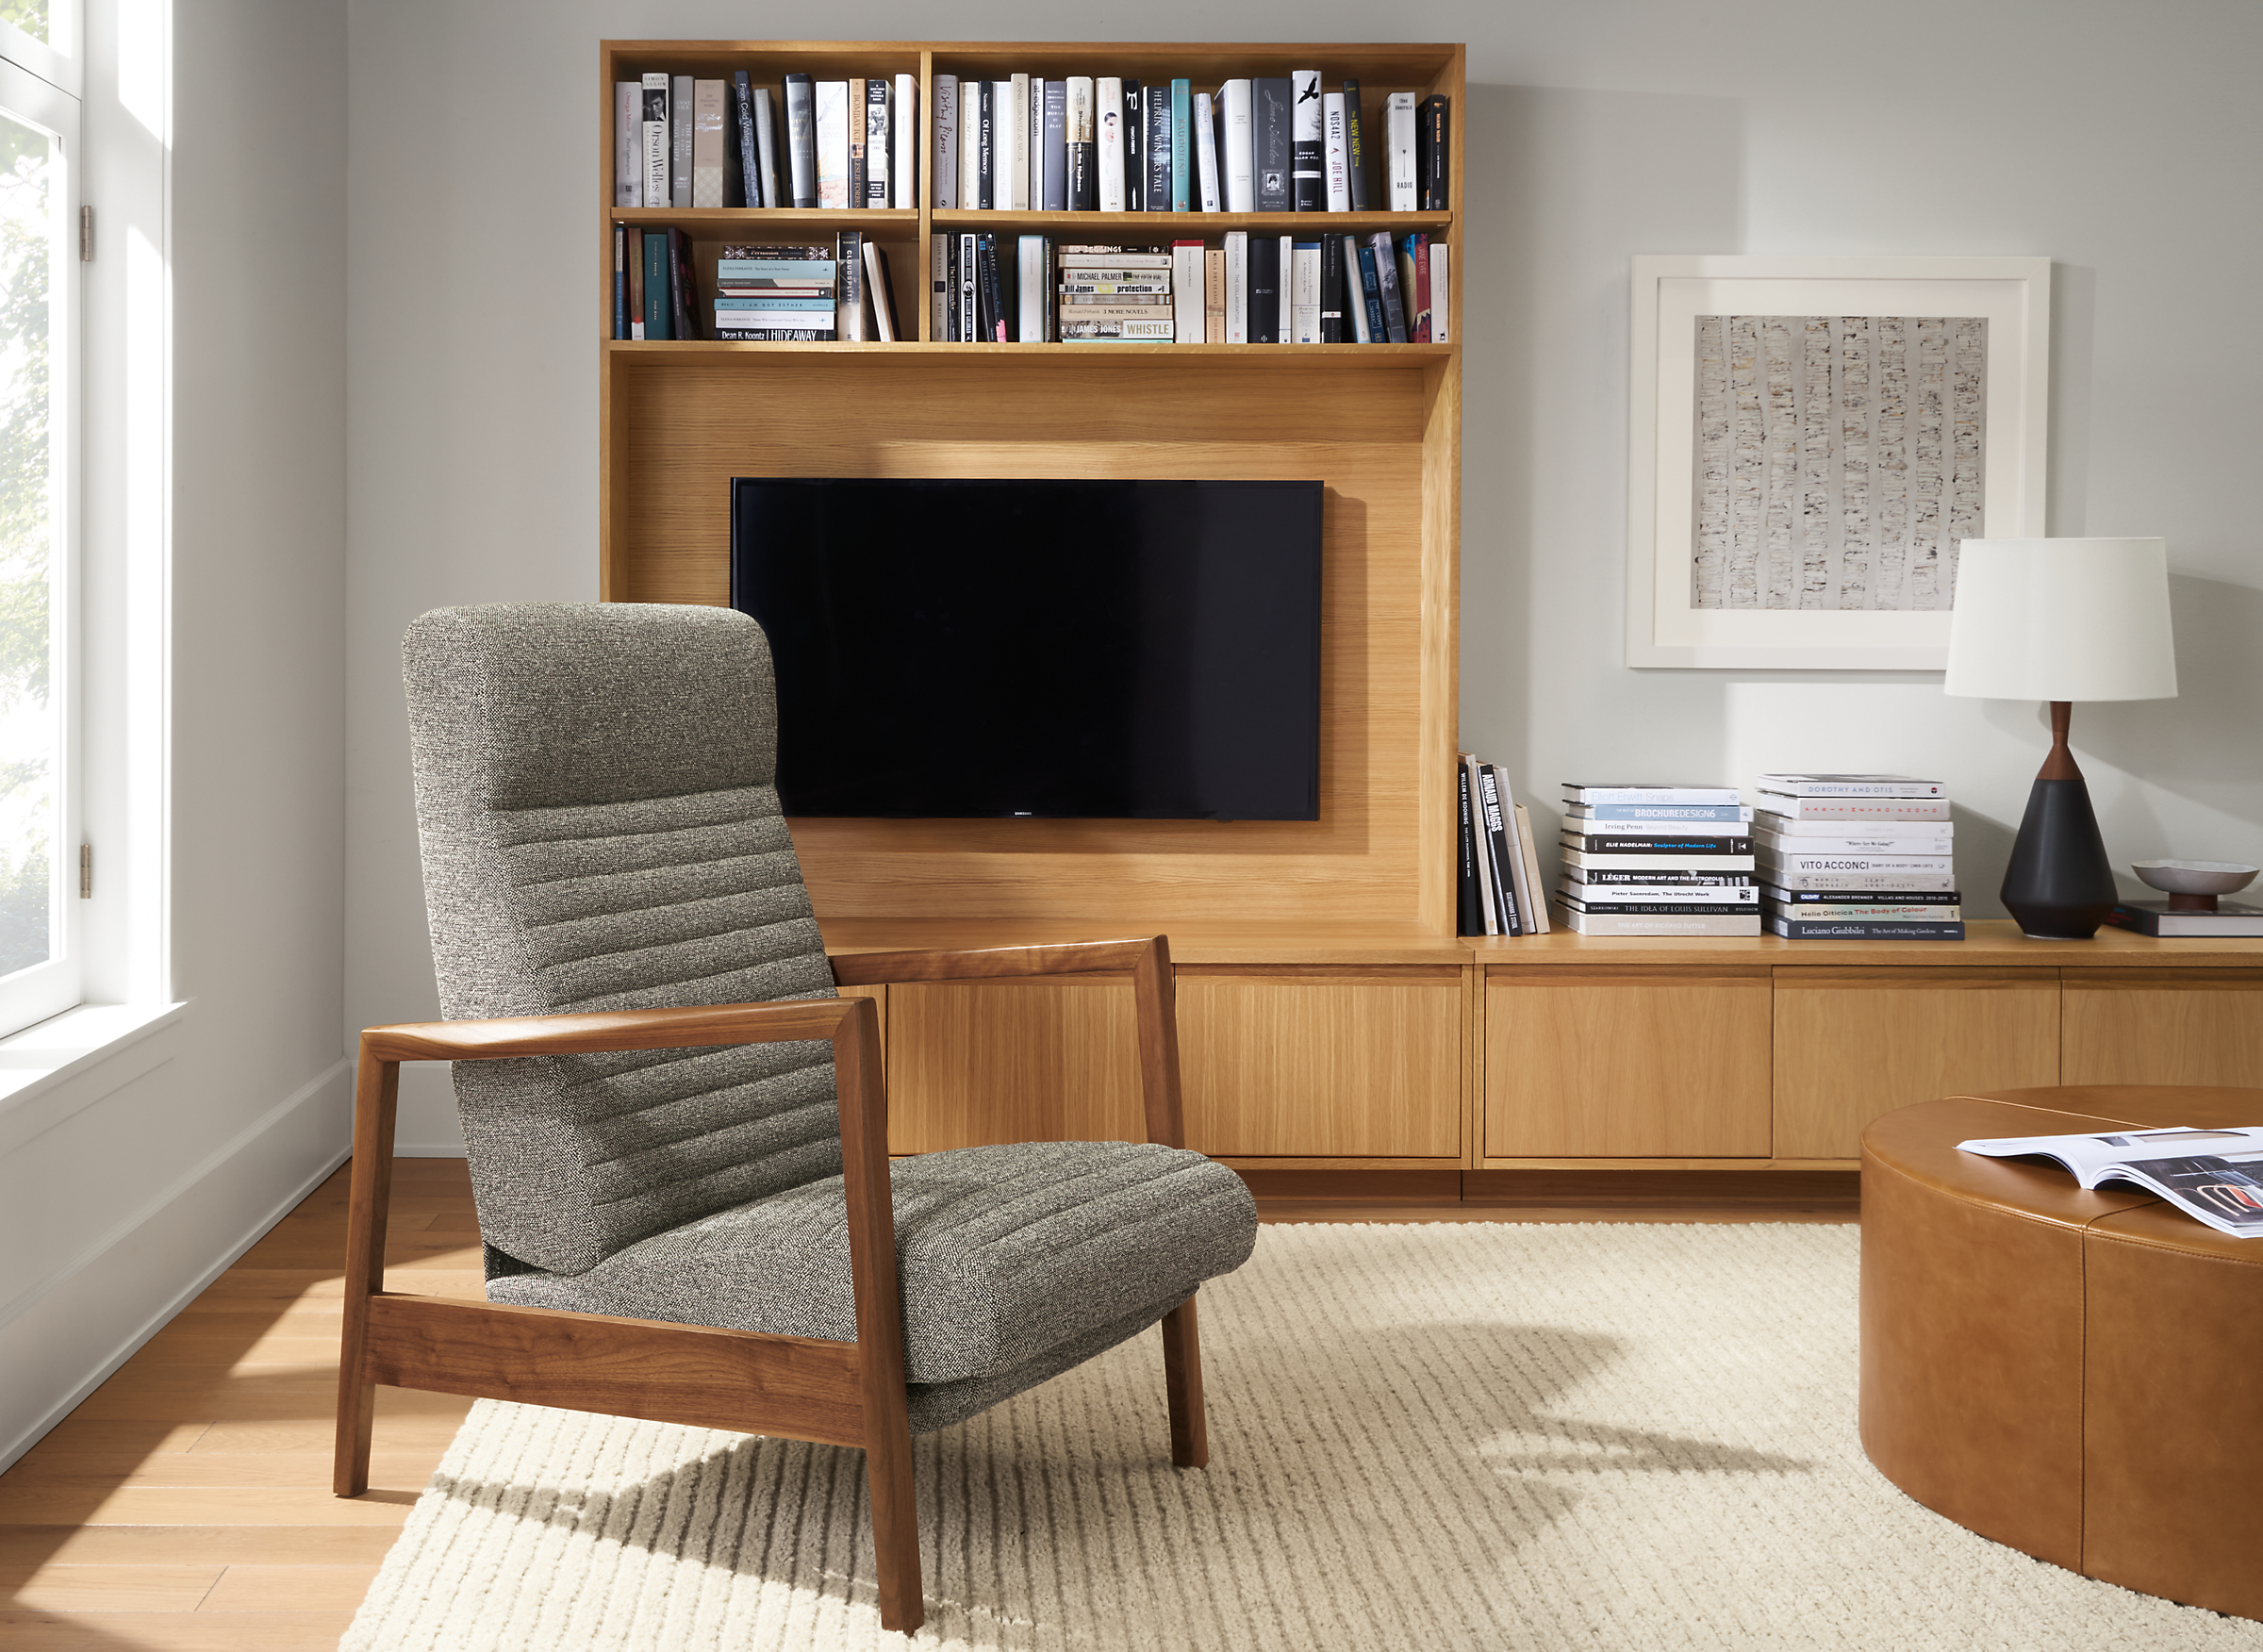 Room setting with Nilsen Recliner in Tatum Fabric and a 
Keaton Media Bookcase with an Arden Ribbed Rug in Oatmeal.